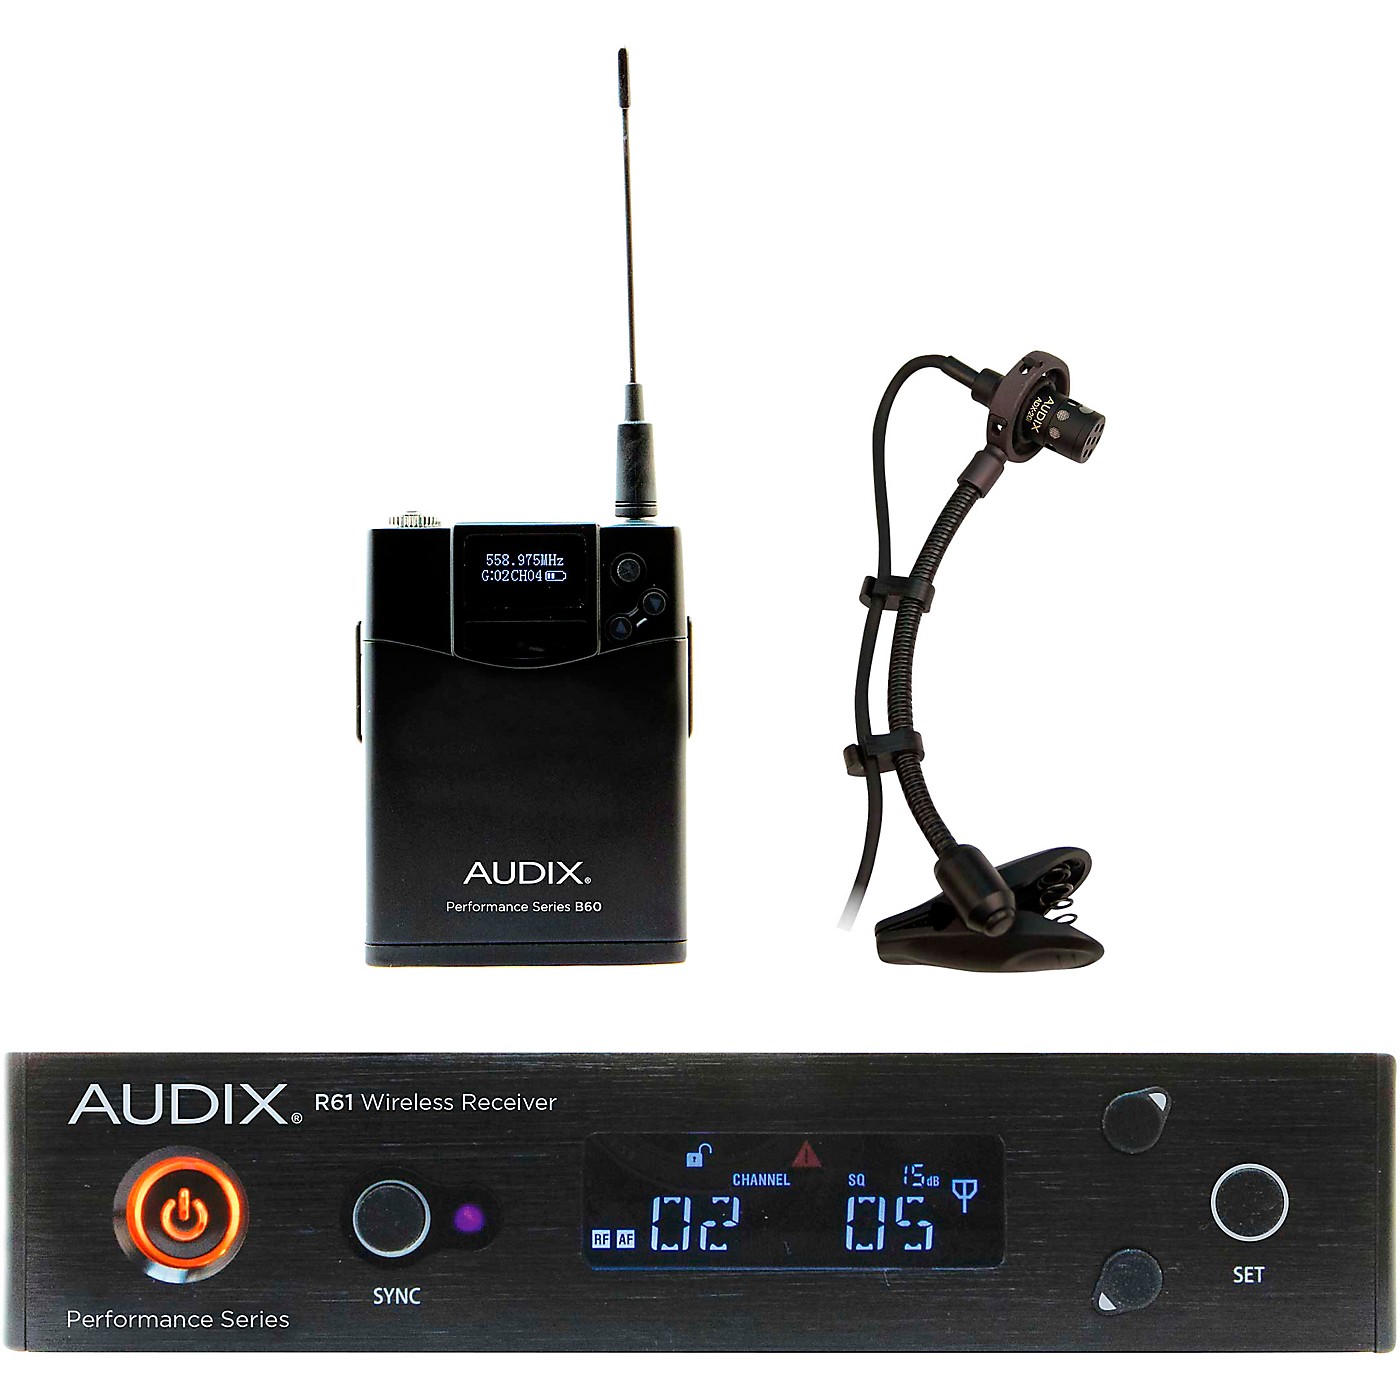 Audix AP61 SAX Wireless Microphone System with R61 True Diversity Receiver, B60 Bodypack Transmitter and ADX20I Clip-on Condenser Microphone thumbnail